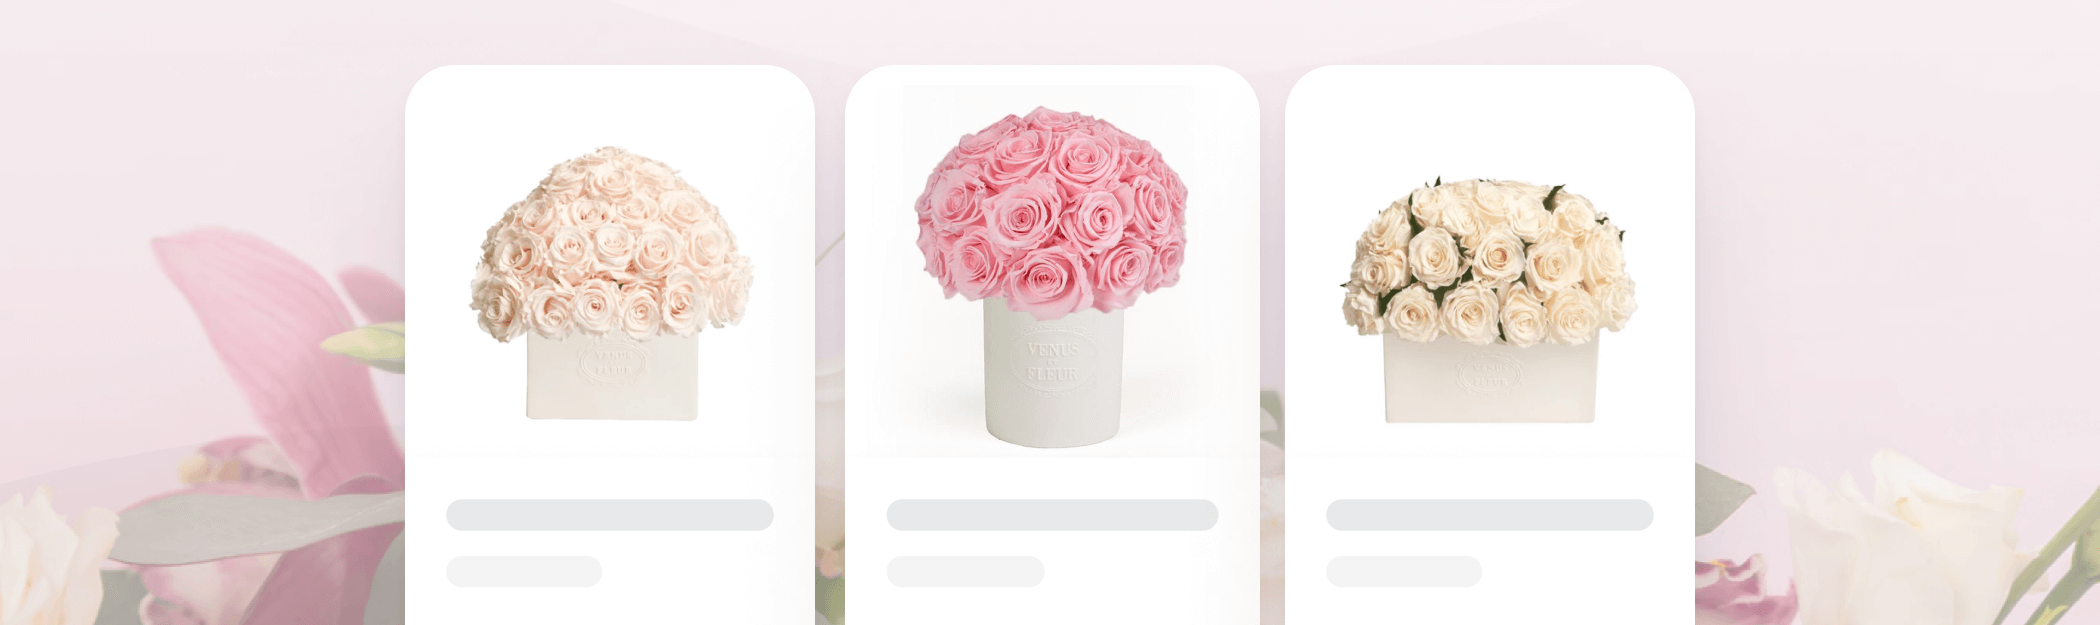 How to Build a Mother’s Day Campaign that Works